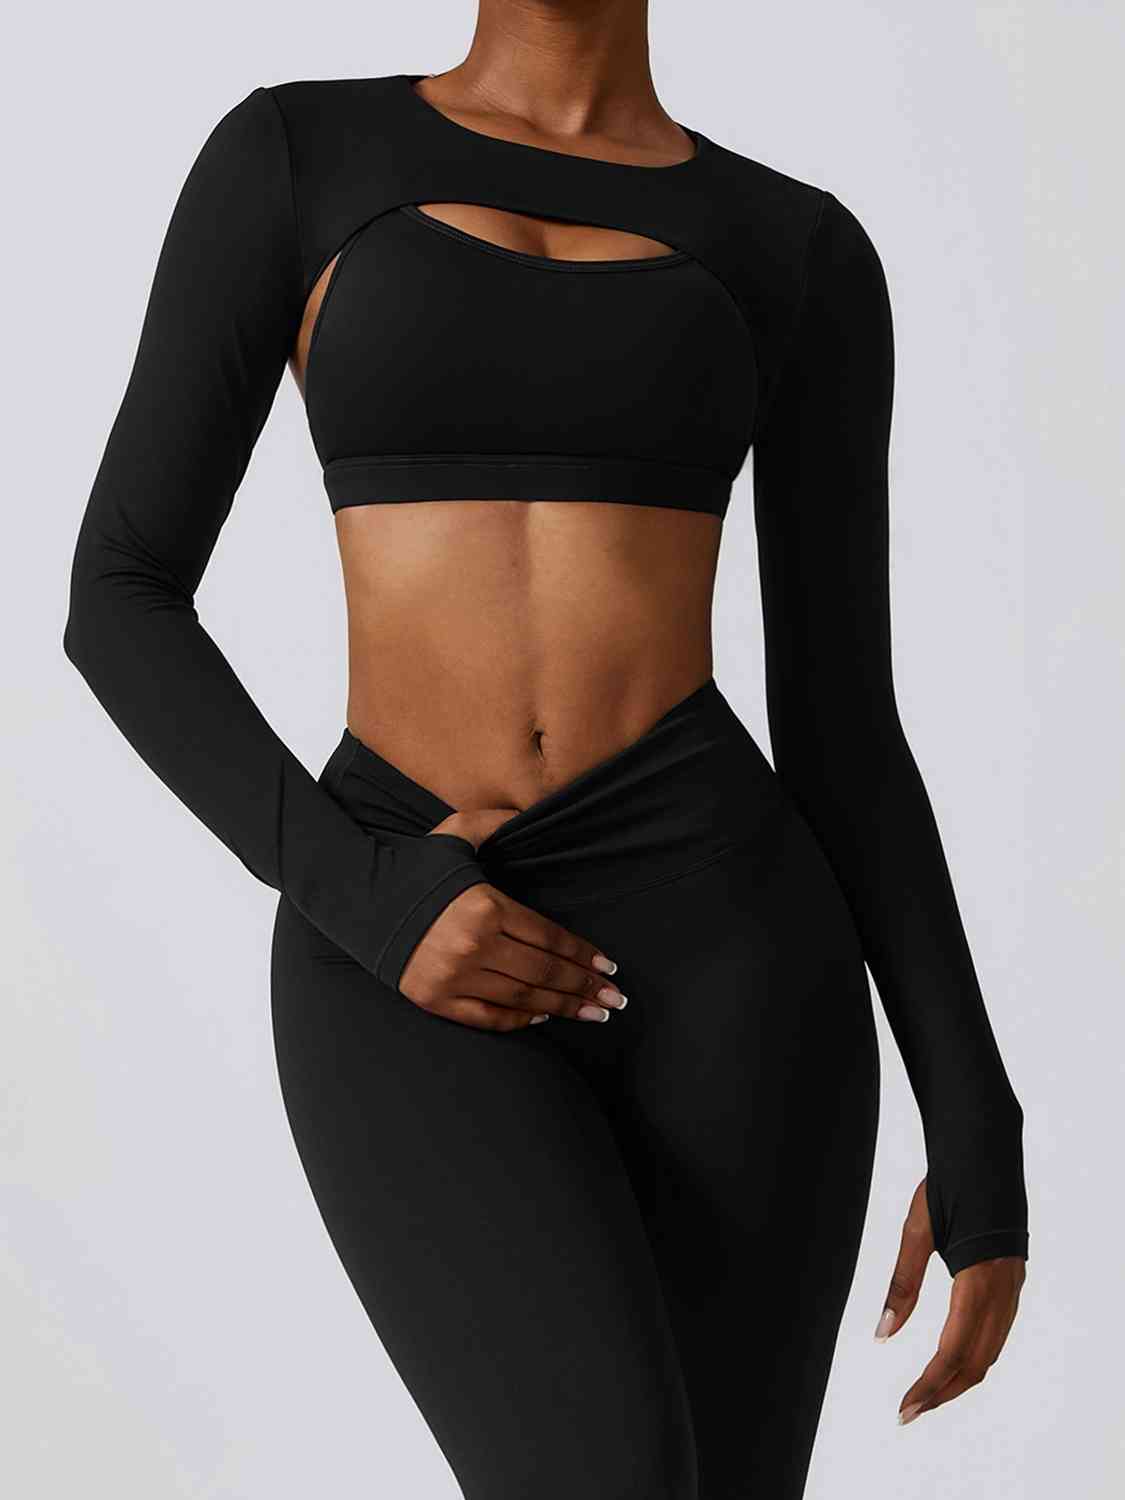 Tropic Pacific Cropped Cutout Long Sleeve Sports Top